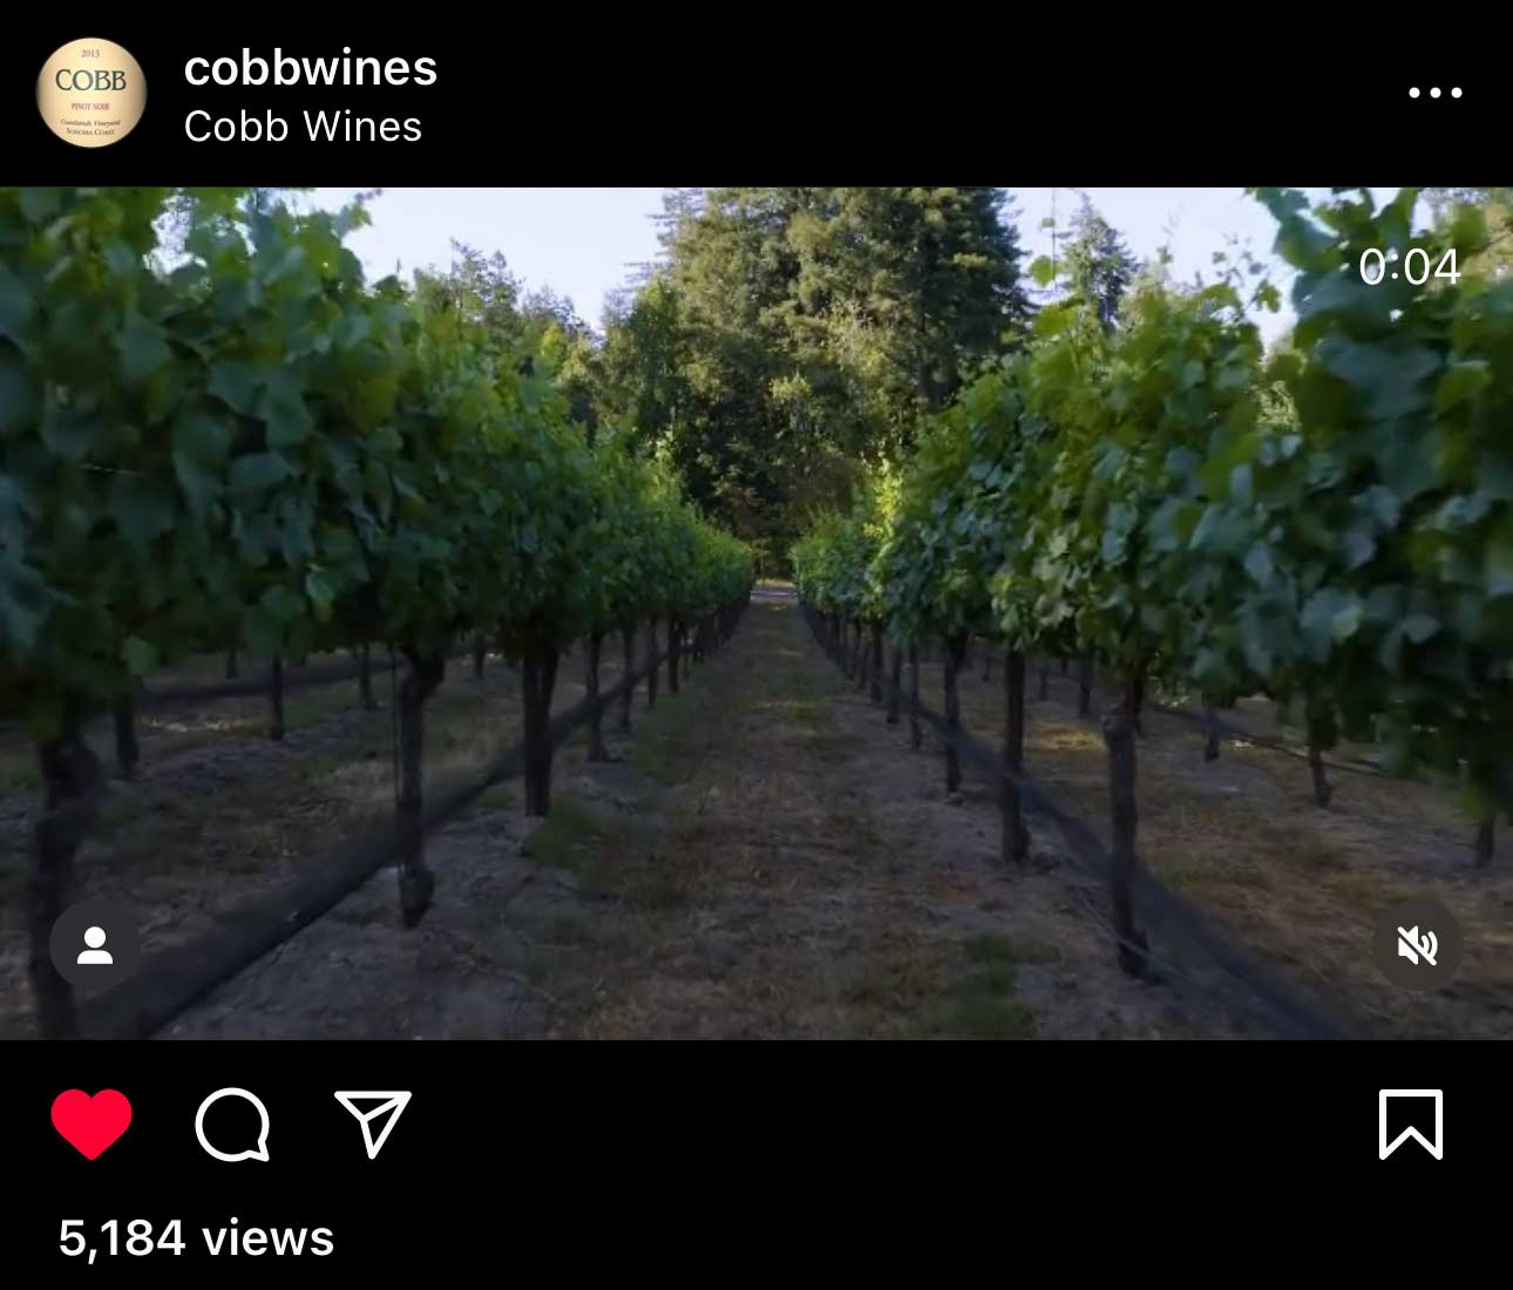 Walking between the grapevines in Cobb Wines